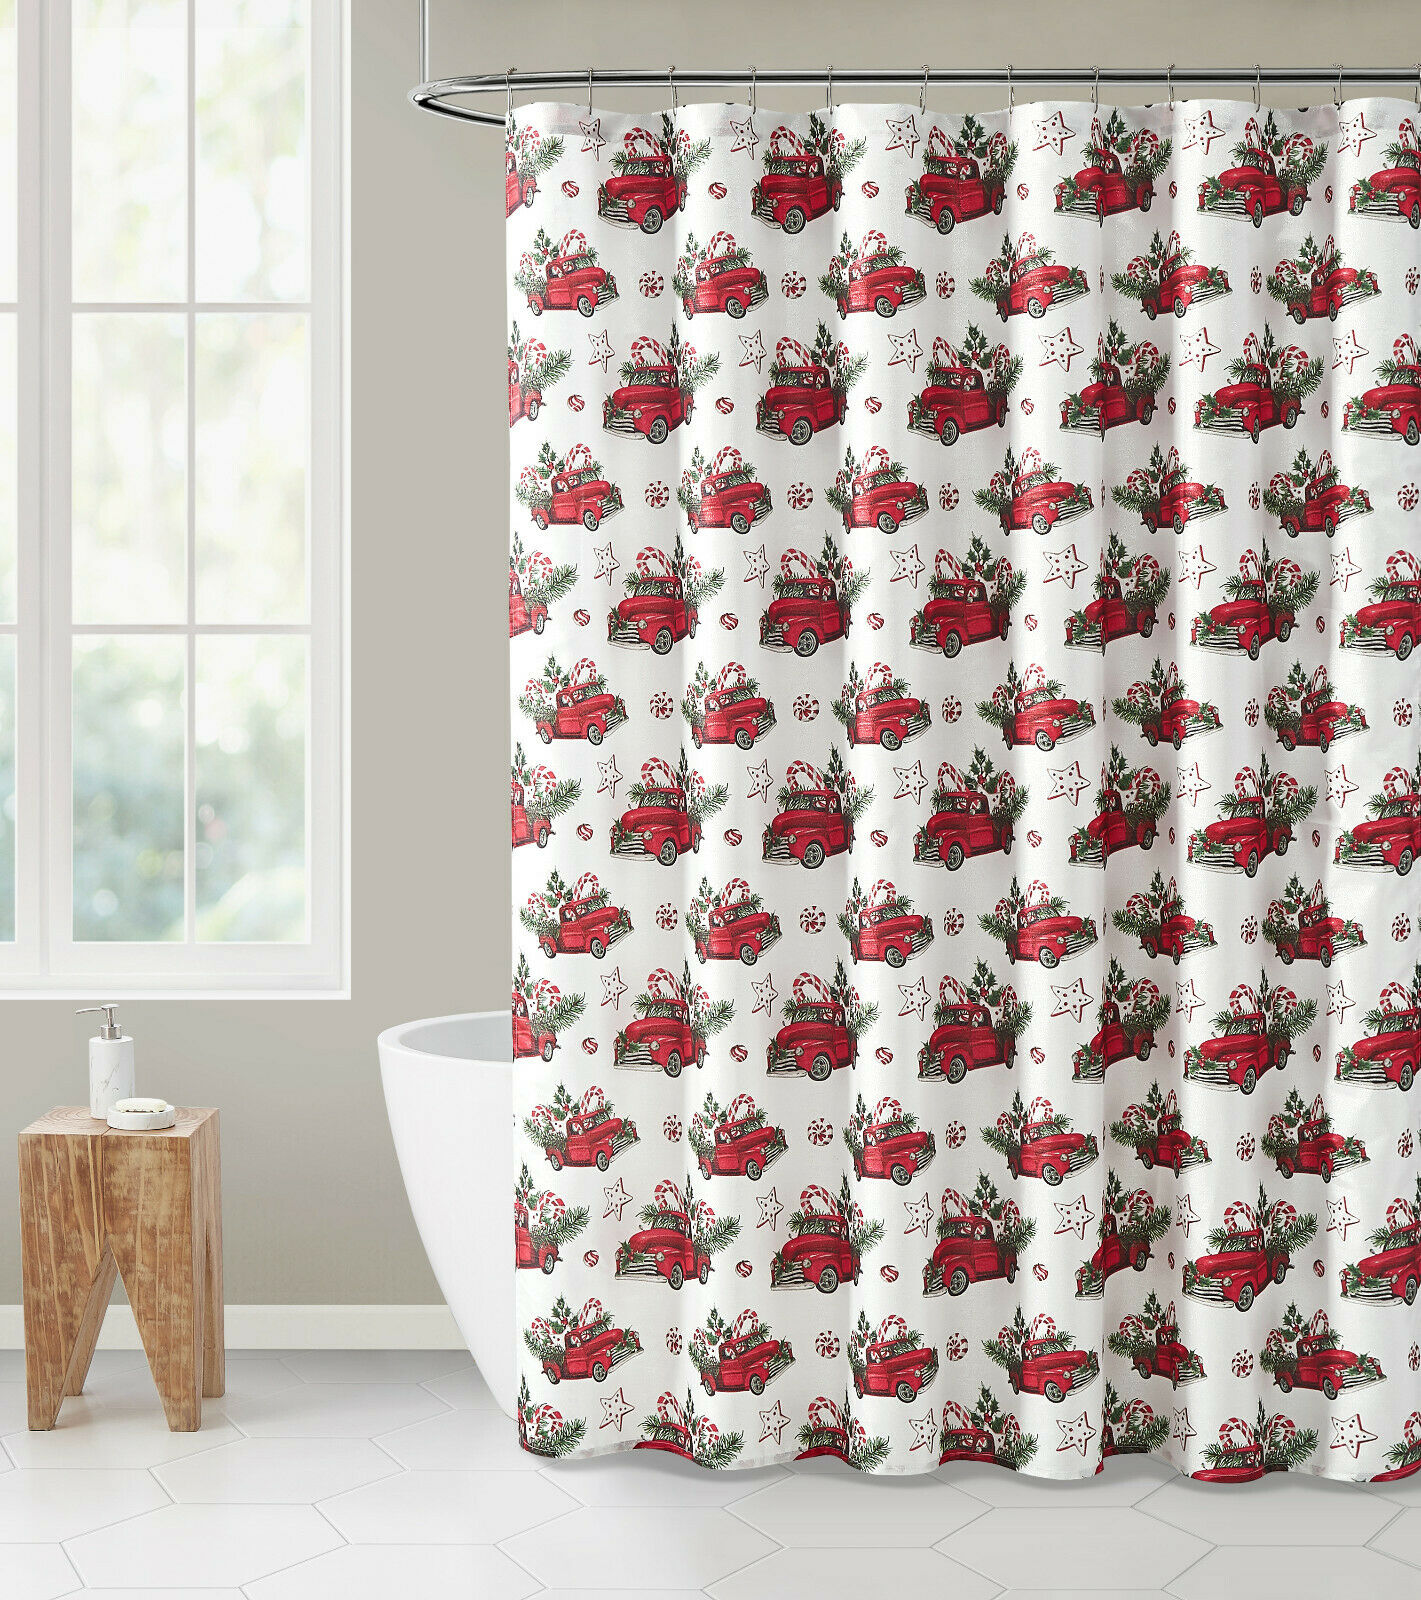 HVEST Farmhouse Christmas Shower Curtain Xmas Balls Pine Trees Snowflake Xmas Gifts Stocking on Rustic Wooden Board Winter Polyester Fabric Waterproof Bathroom Curtain with 12 Hooks 69X70Inches 